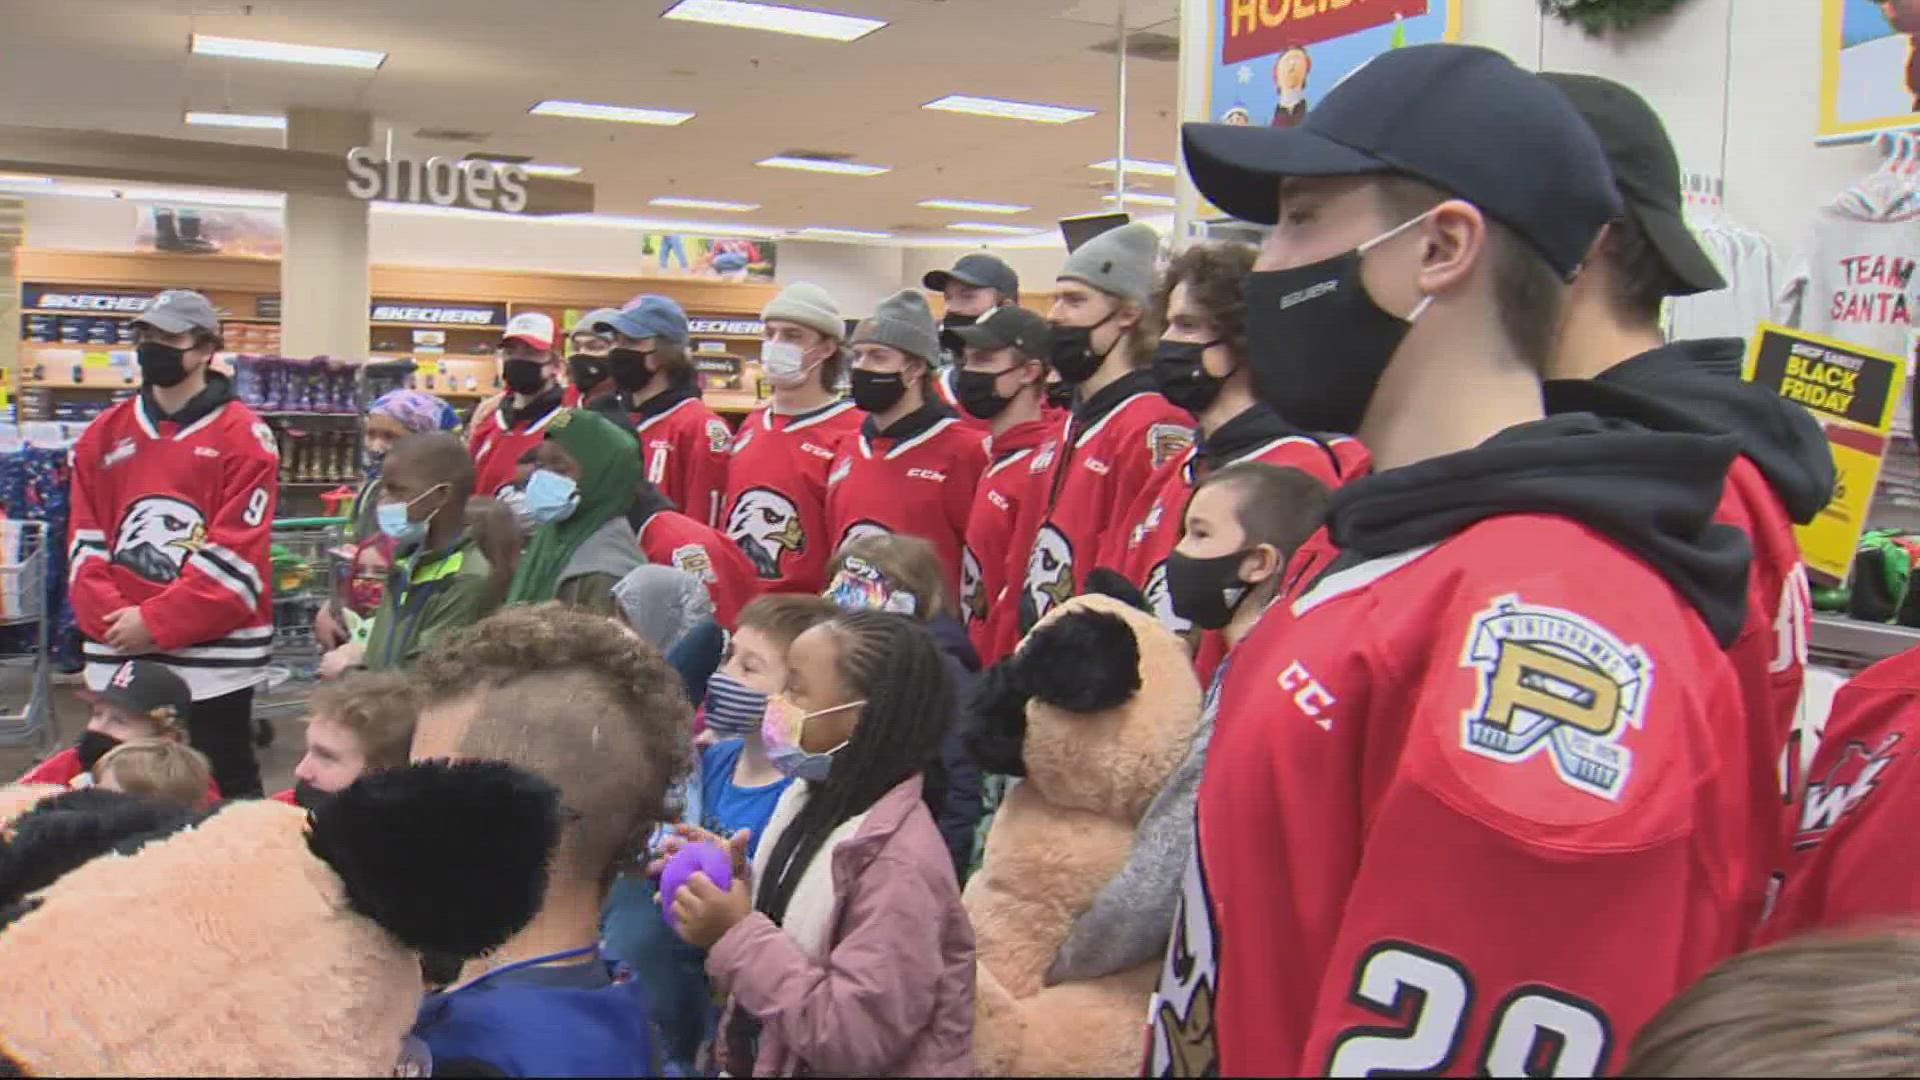 The "Shop With a Hawk" program pairs at-risk kids with players for a day of shopping and mentorship.